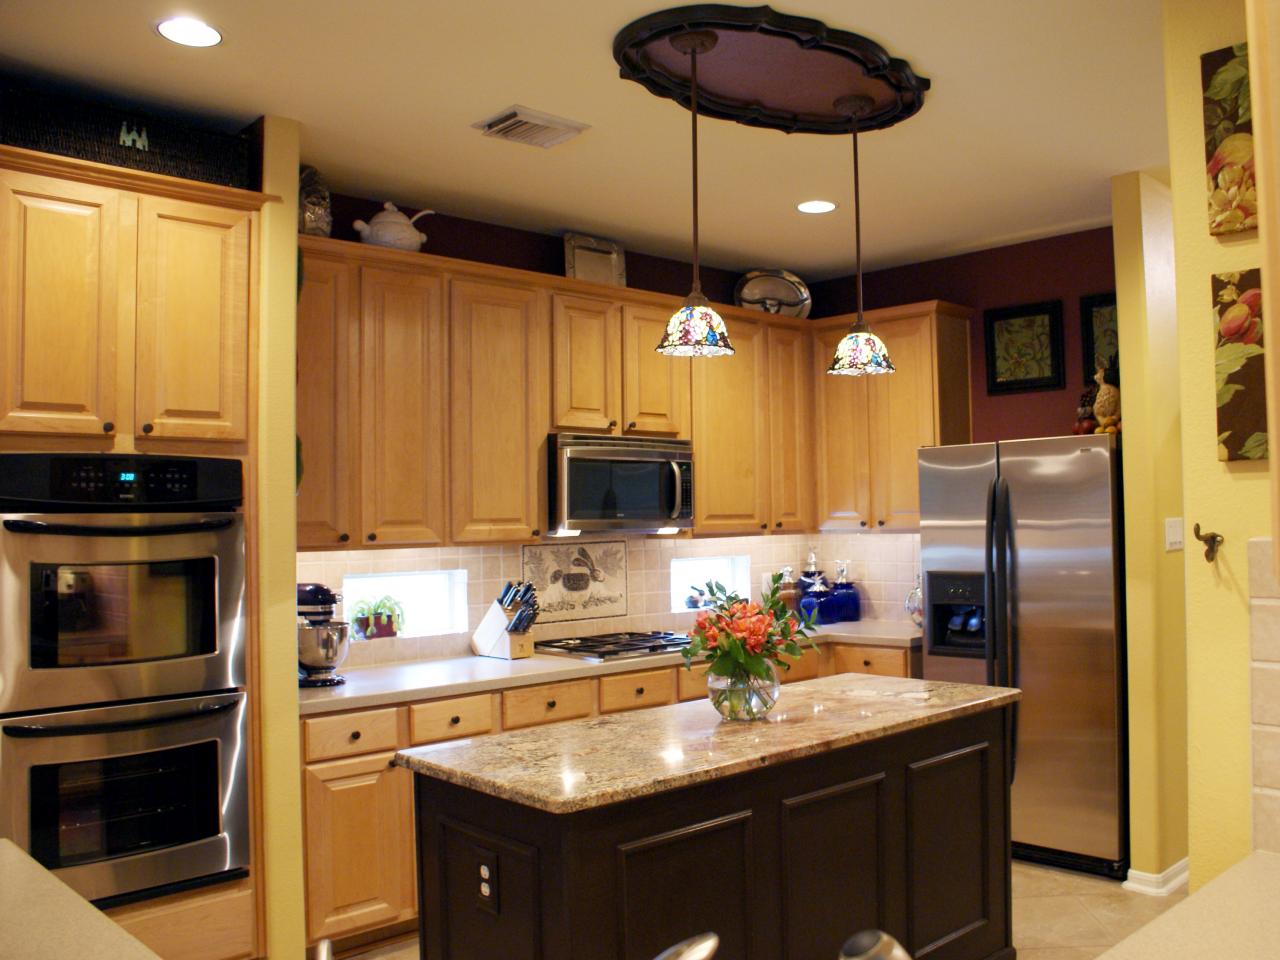 Cabinets Should You Replace Or Reface, Is It Expensive To Replace Kitchen Cabinet Doors